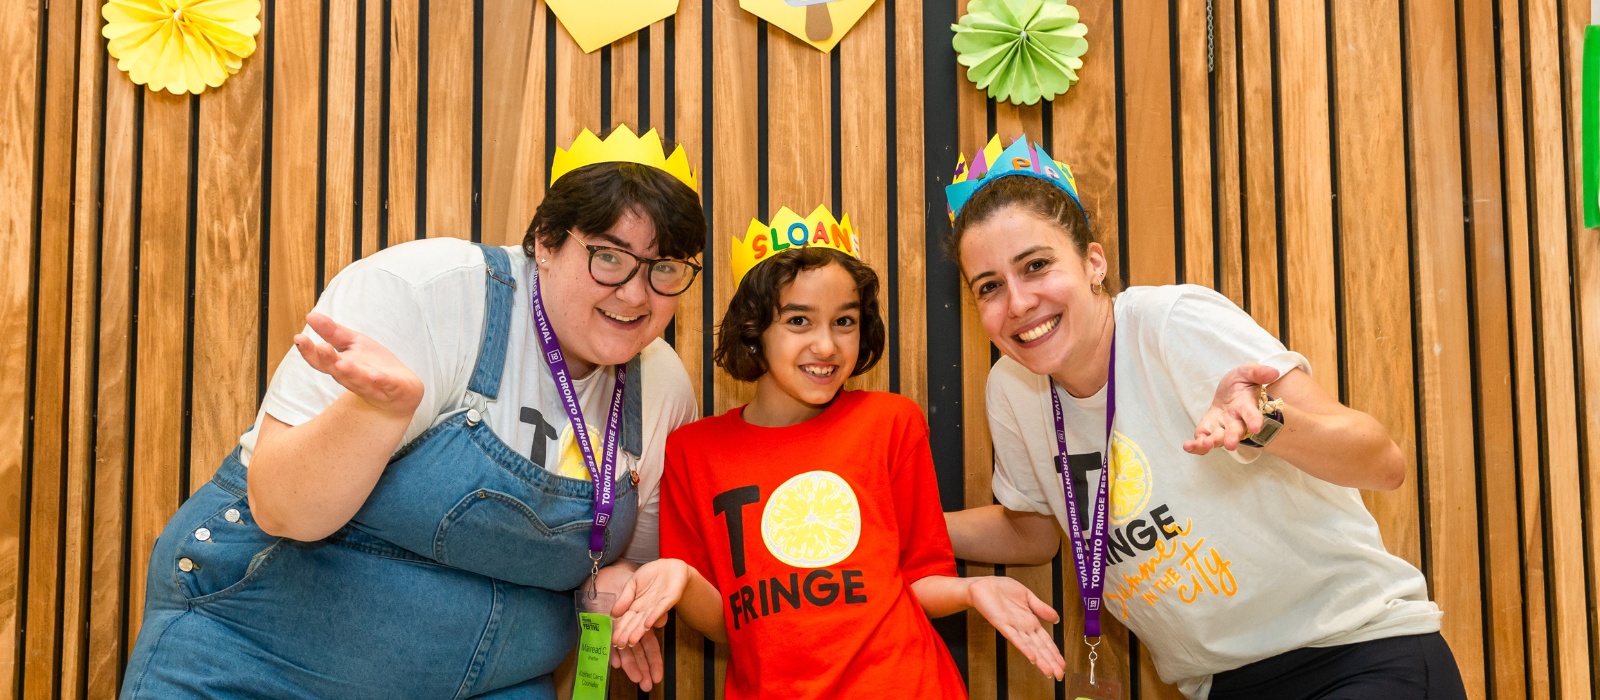 A Fringe Kids Camper wears a handmade crown and smiles between two Camp Counsellors who are also smiling